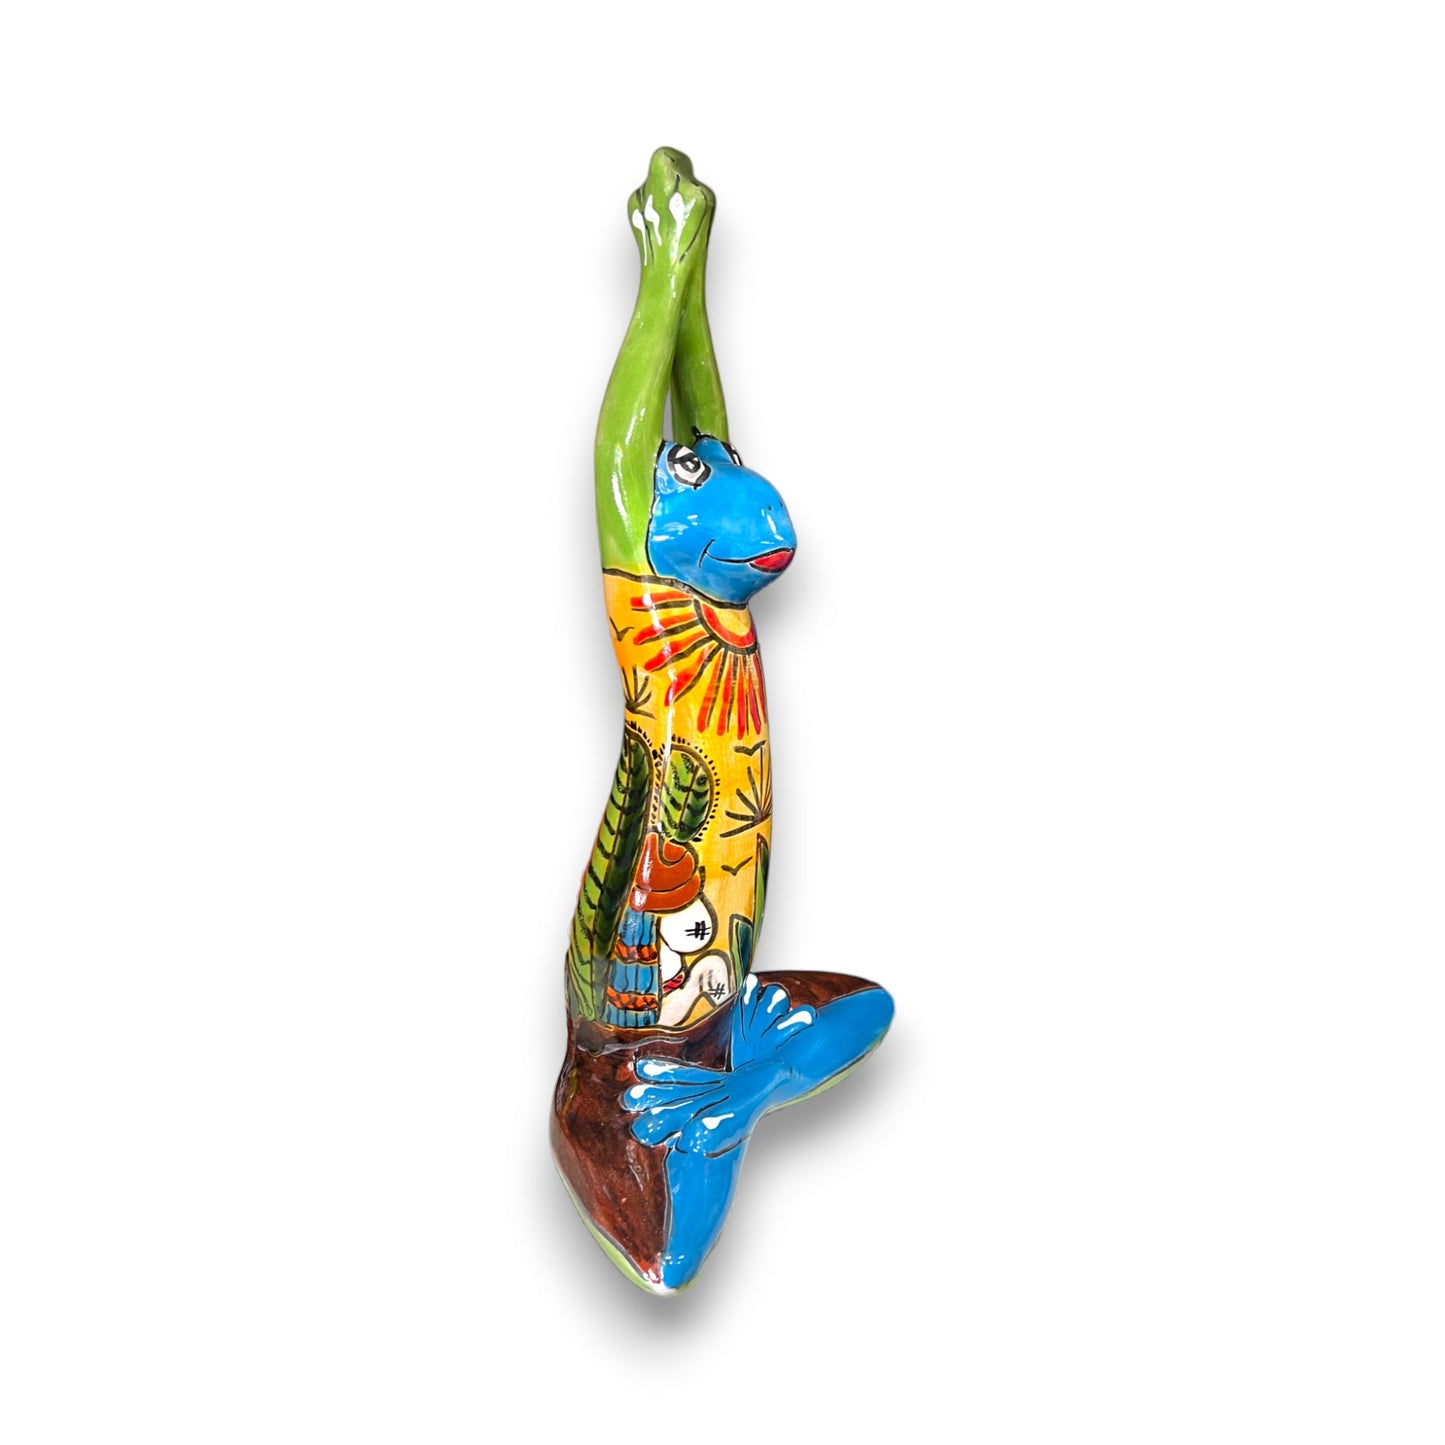 Vibrant Talavera Frog Statue | Colorful Hand-Painted Yoga Frog with Desert Design